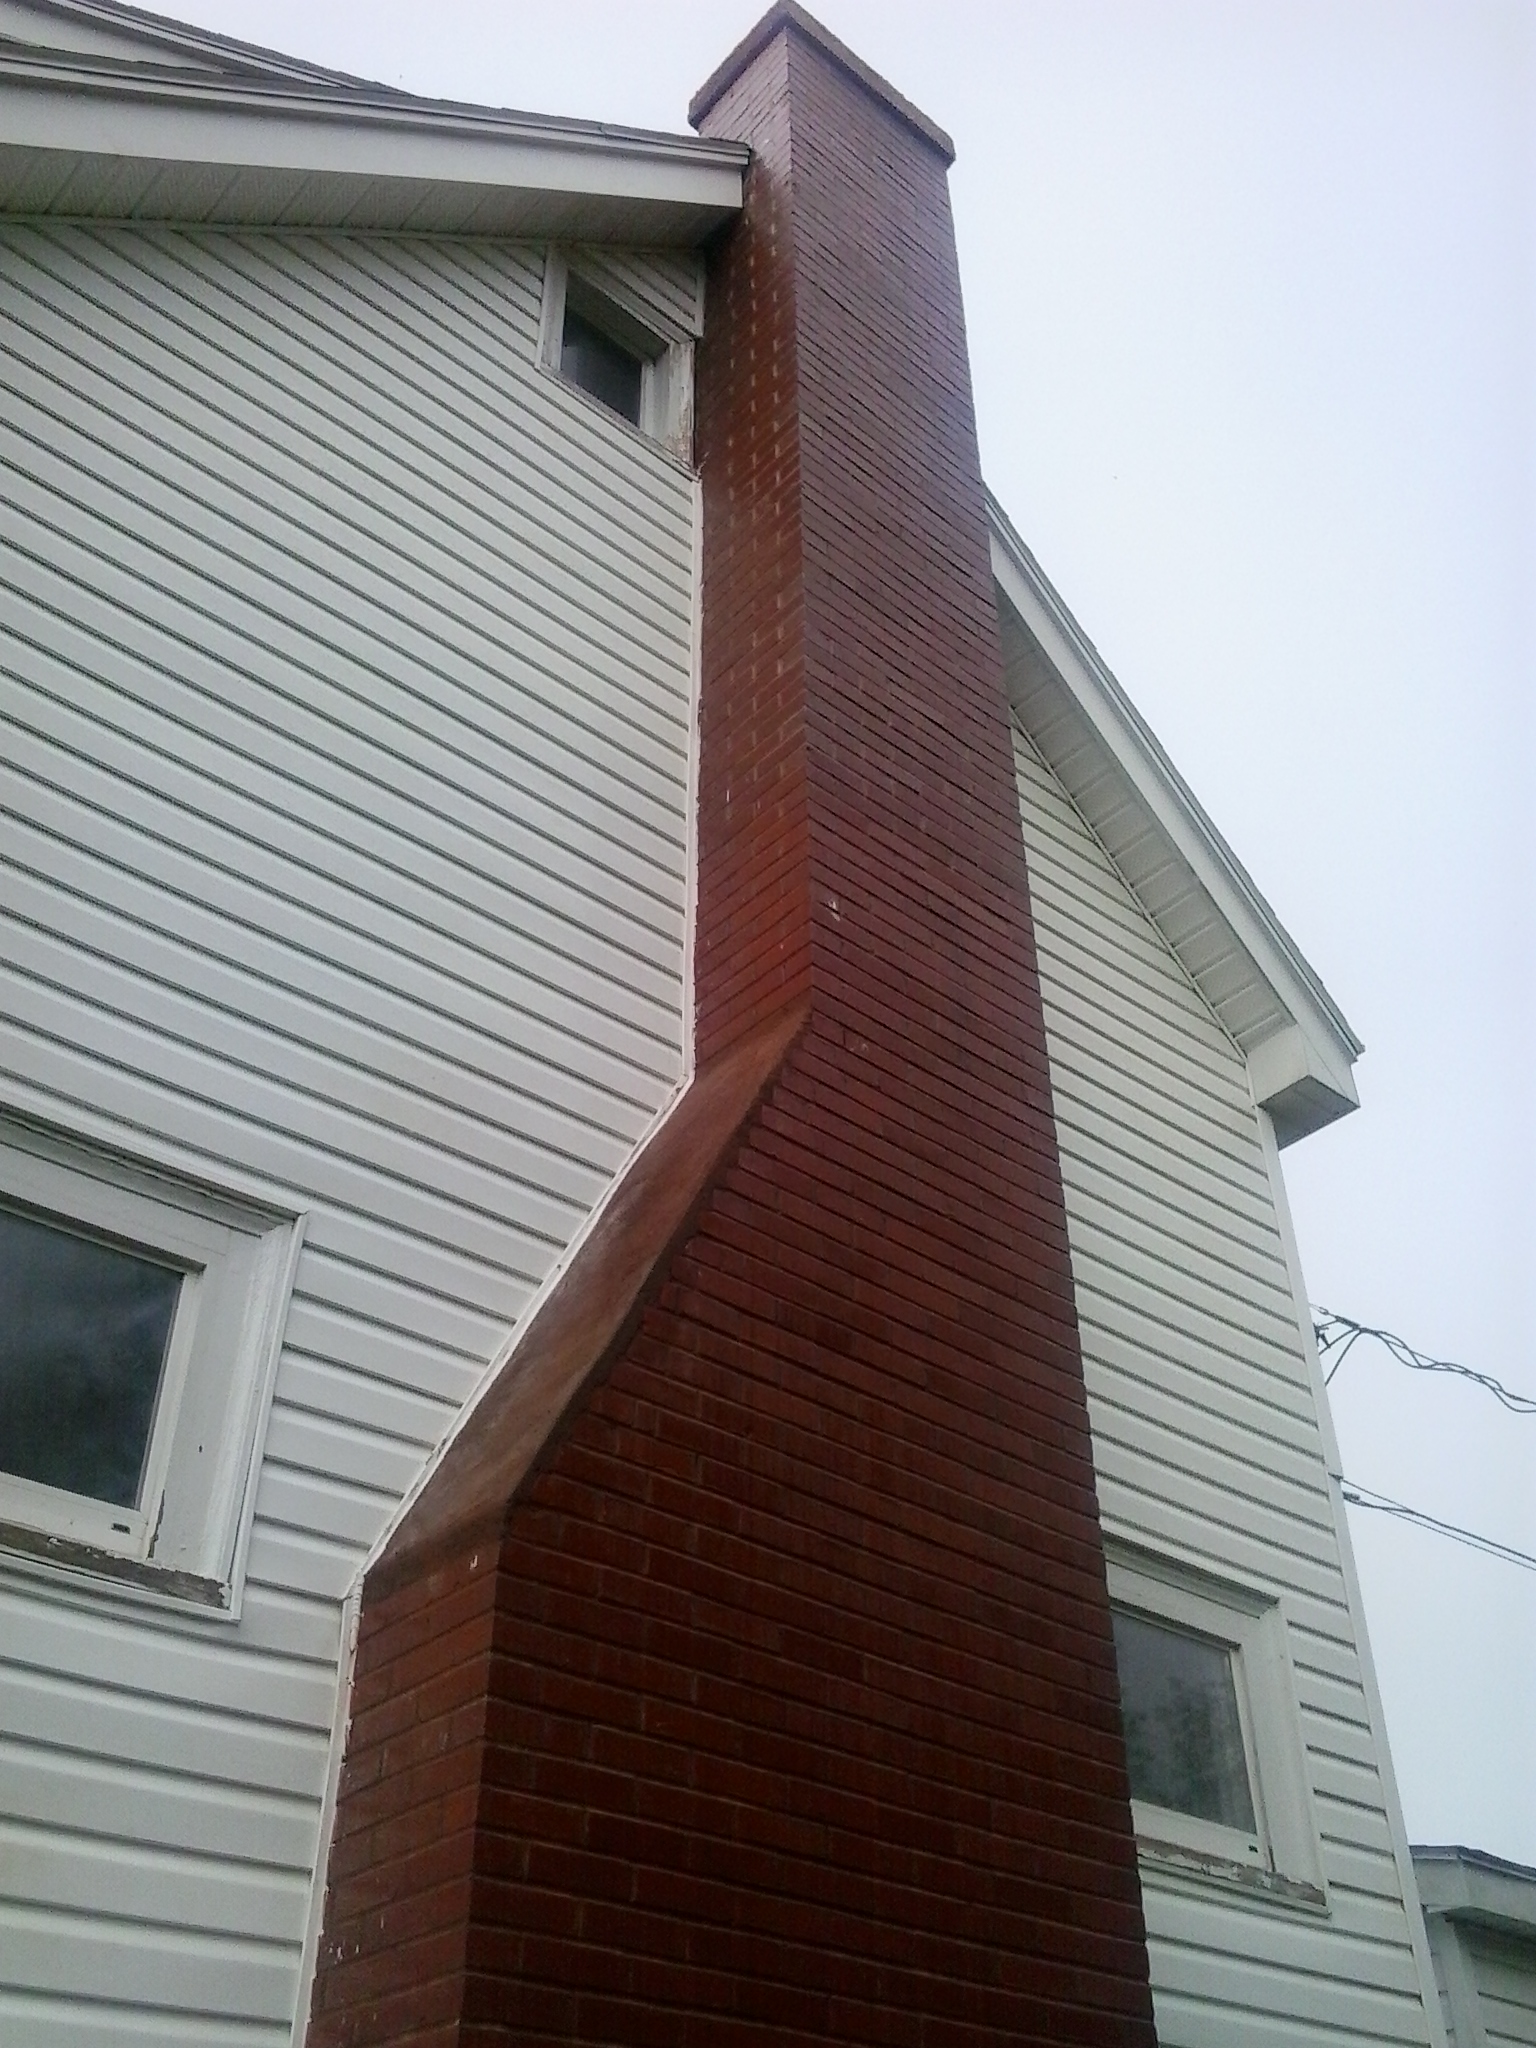 image of chimney-chimney repair services completed in Halifax-Dartmouth Regional Municipality, NS by Pro Chimney Services based in Halifax, NS servicing all of the Halifax-Dartmouth Regional Municipality, Bedford, Sackville, Mount Uniacke, Windsor, Hantsport, Wolfville, Kentville, Chester, Mahone Bay, Lunenburg, Bridgewater, Liverpool, Fall River, Wellington, Enfield, Elmsdale, Brookfield, Truro, Musquodoboit Harbour & surrounding areas.